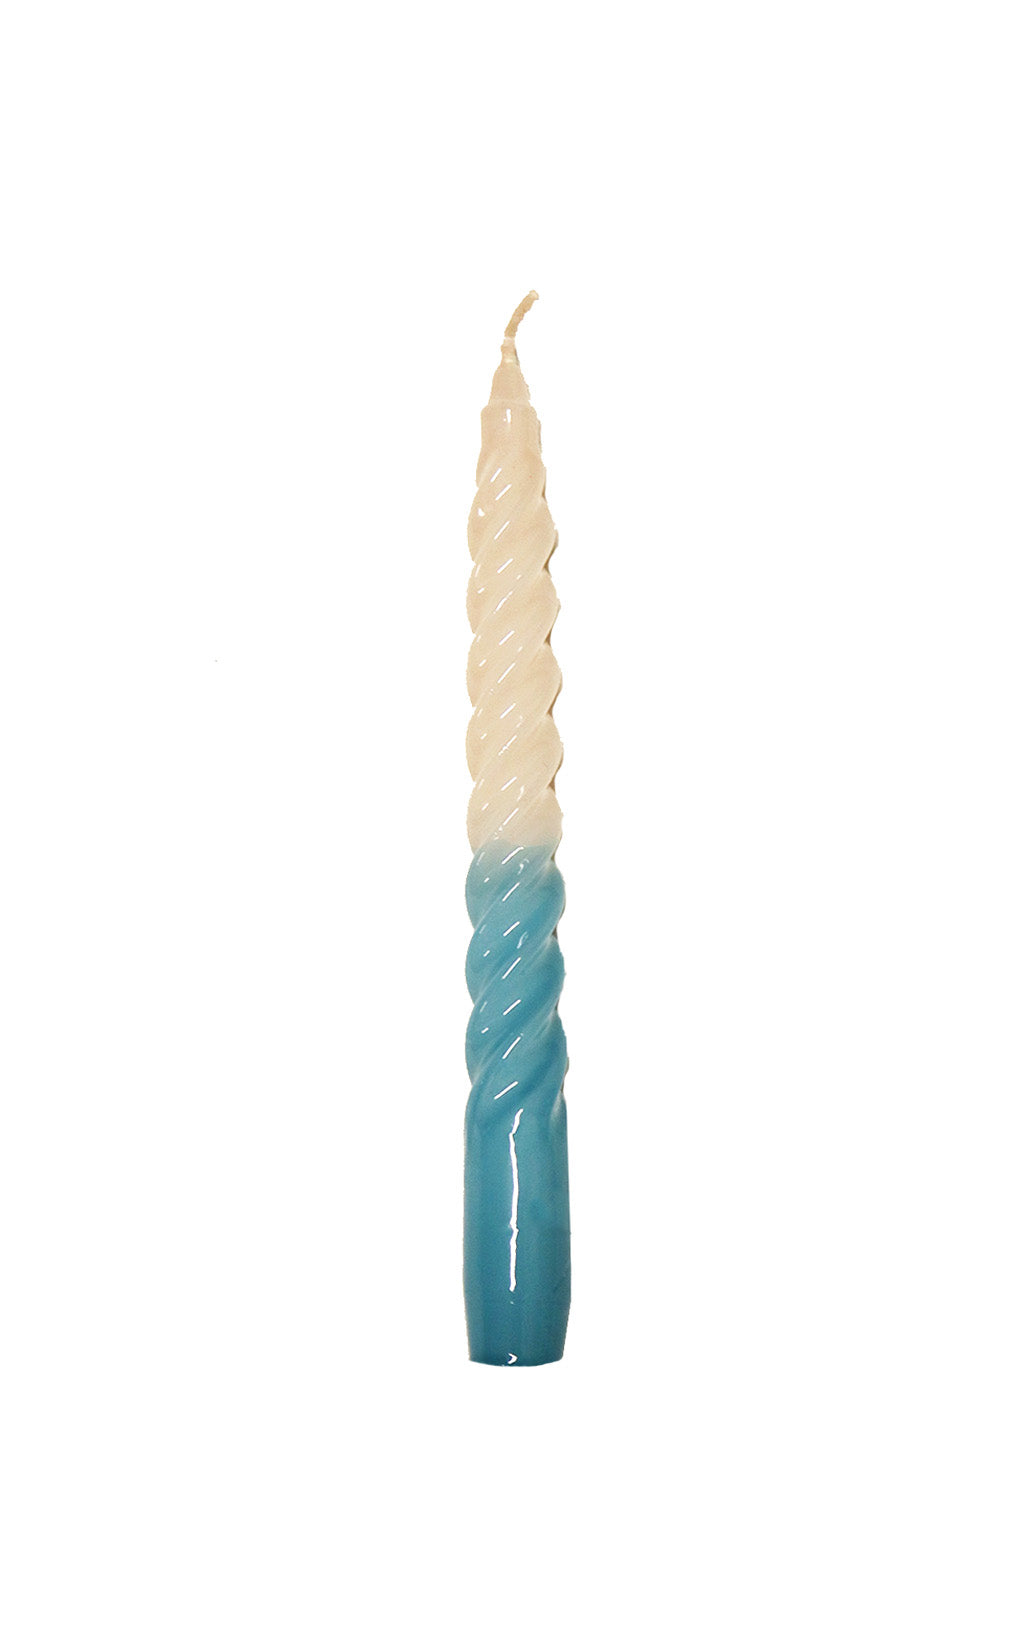 The Small Swirl Candle Ombre